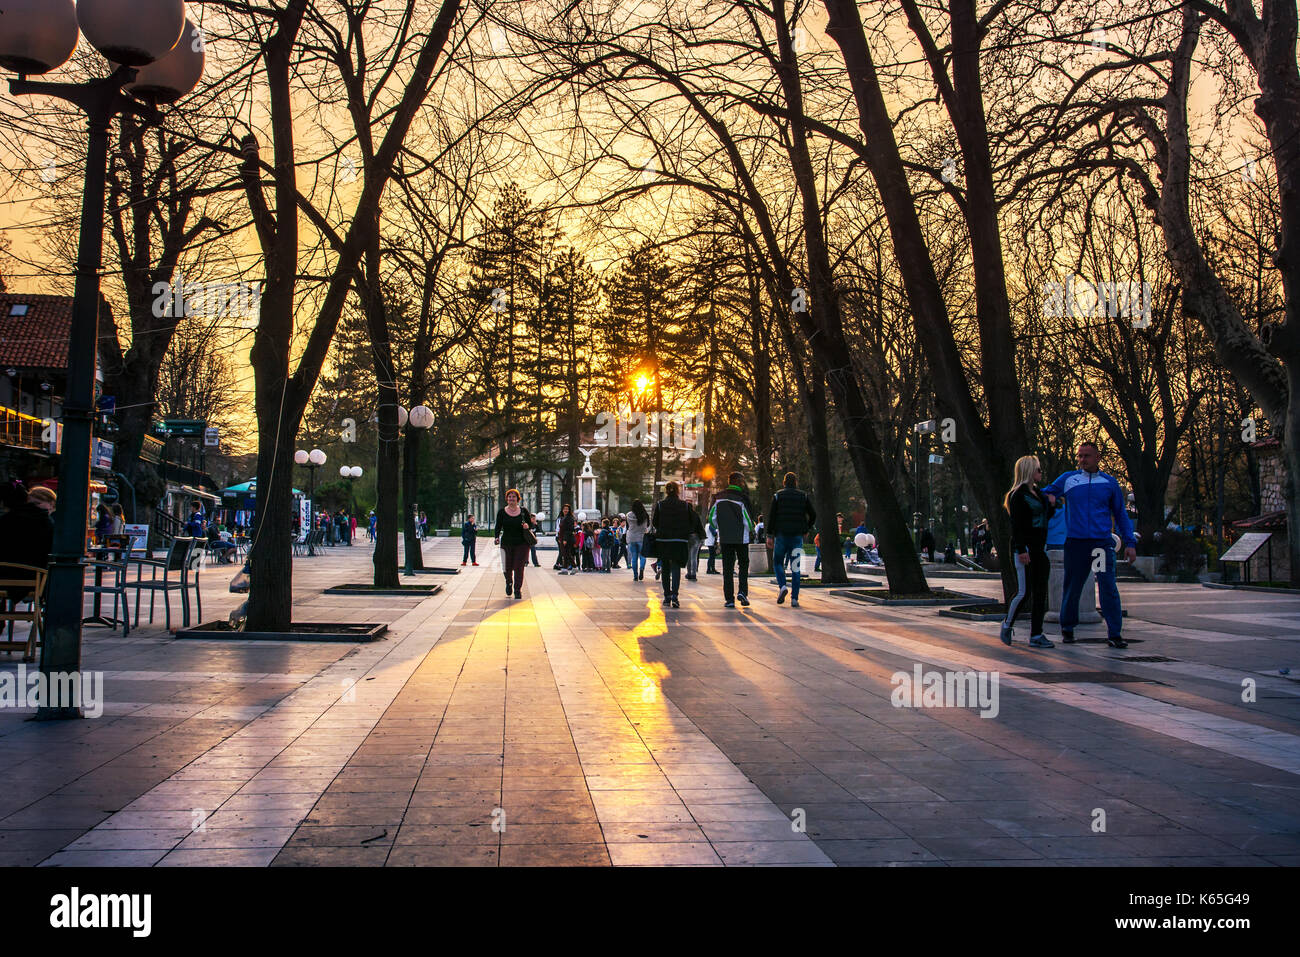 SOKOBANJA, SERBIA - March 25, 2017: Sokobanja, Serbia spa city with tourists and locals in the walking area at sunset Stock Photo